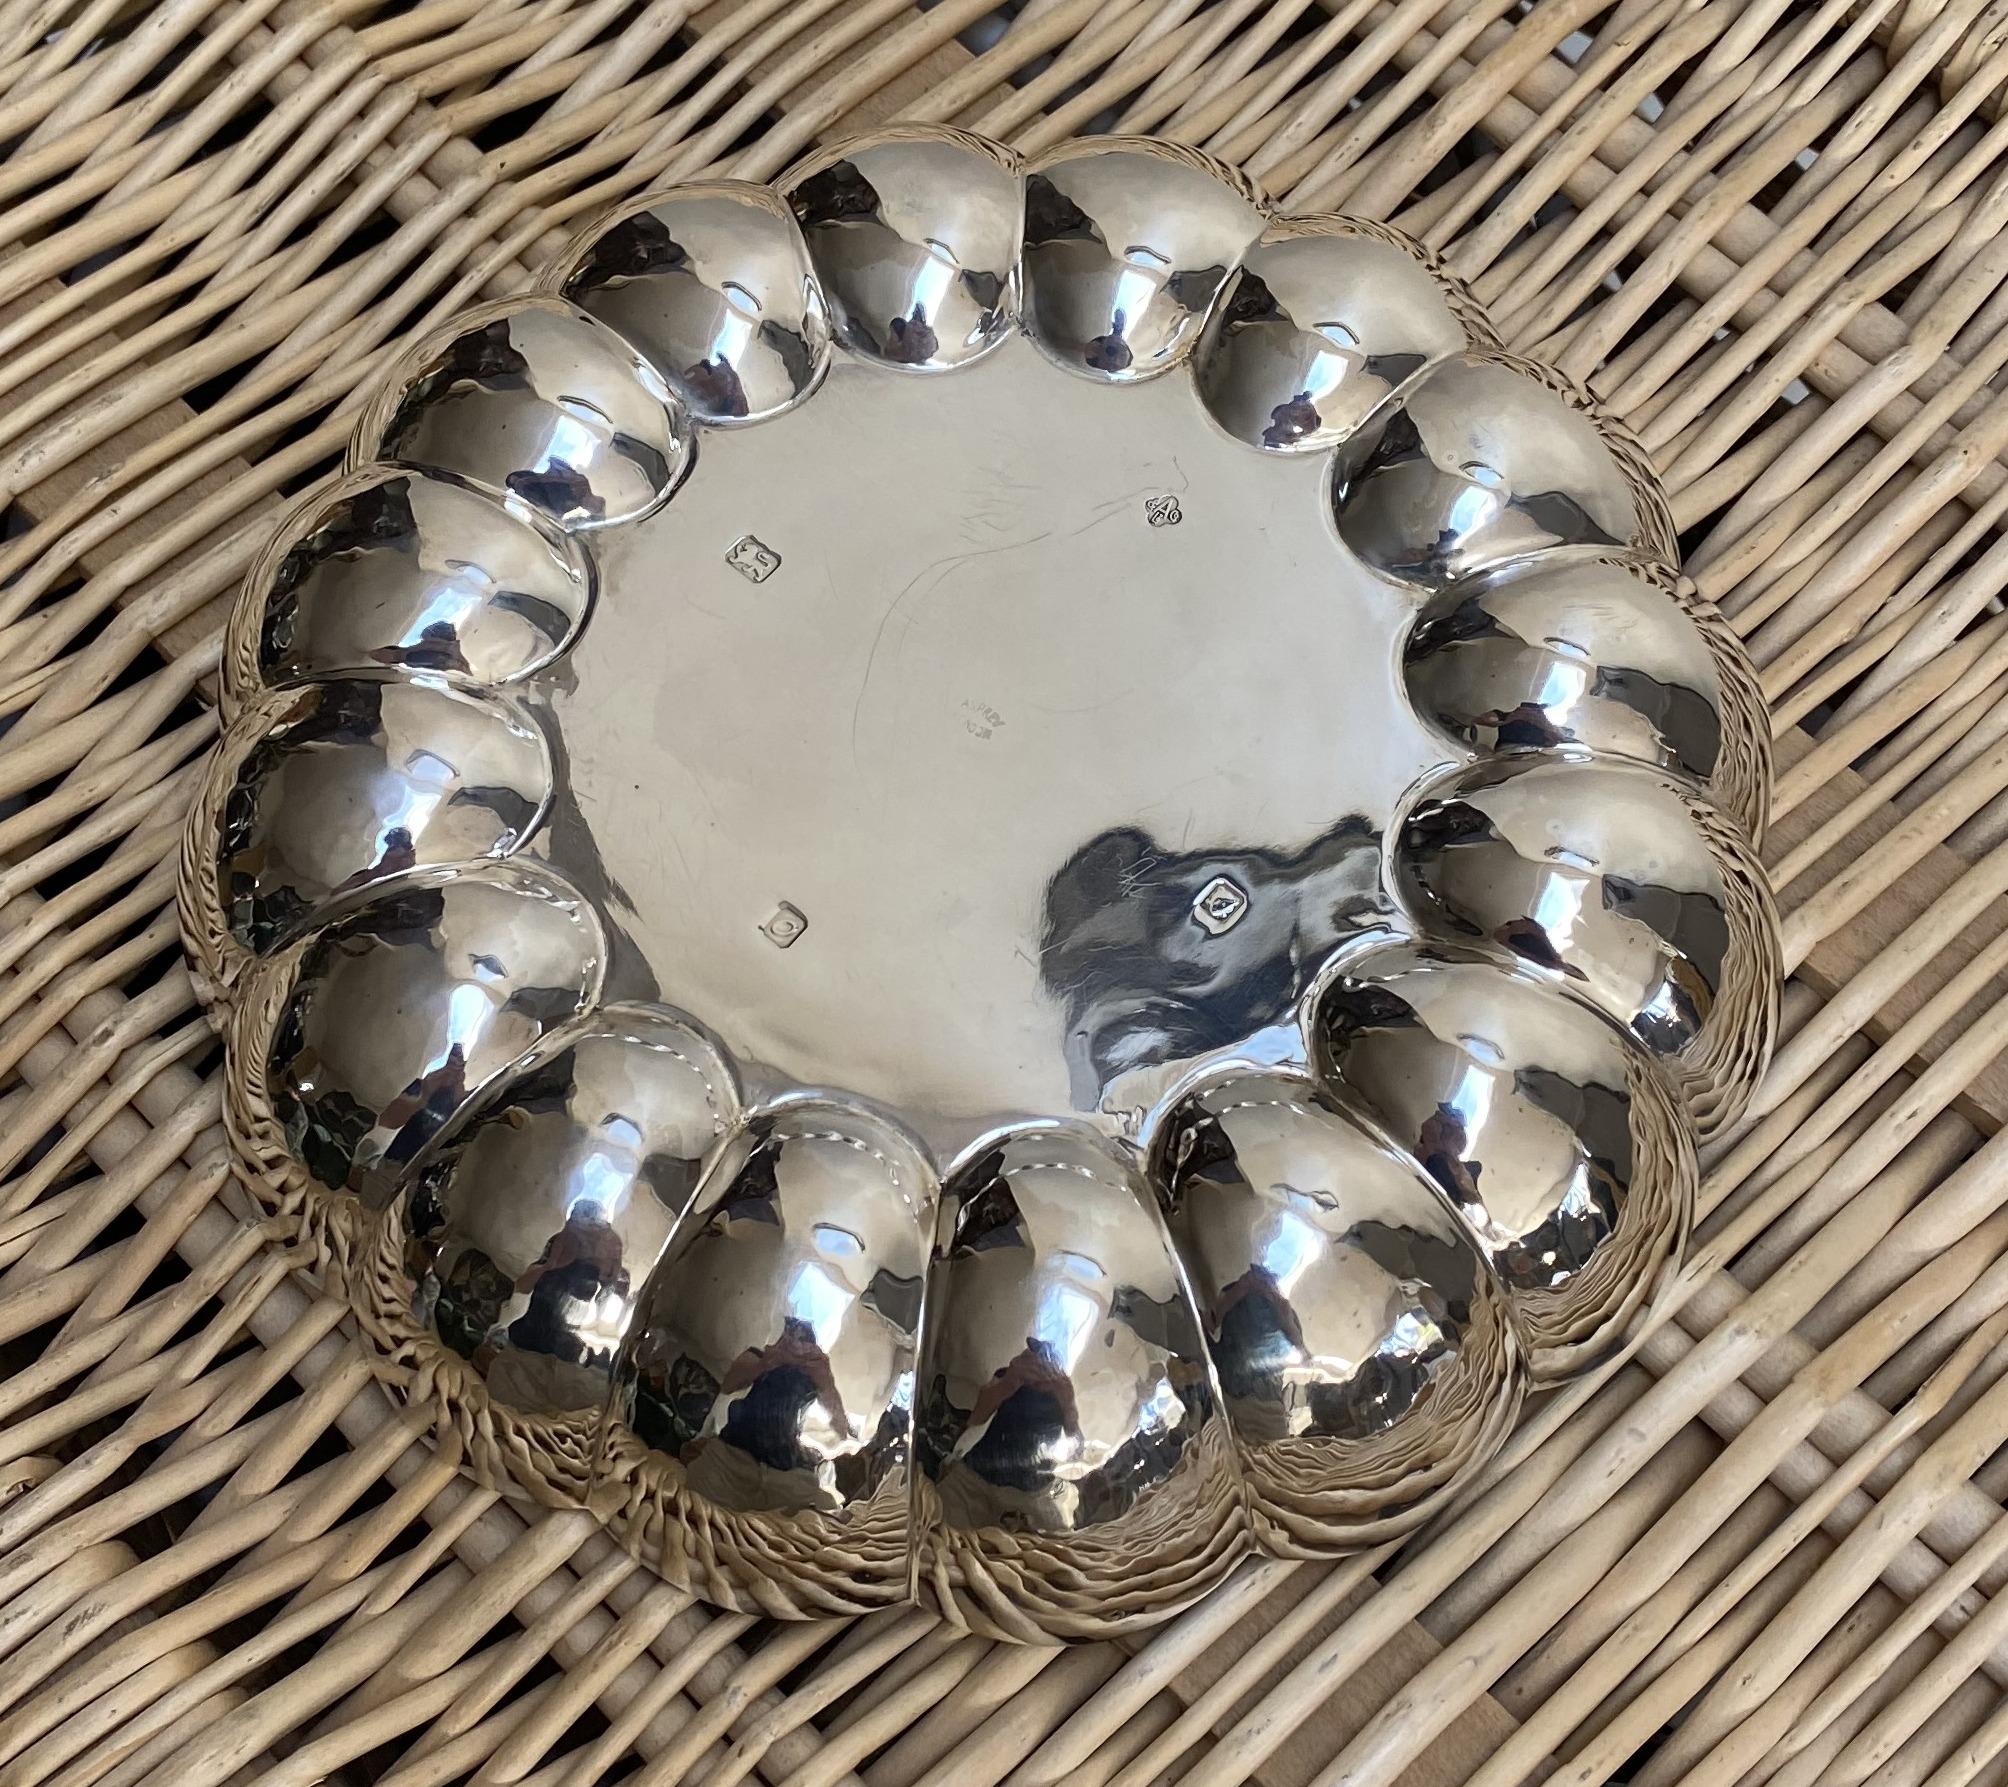 Stunning Rare Asprey London 1969 Solid Sterling Silver Strawberry Dish or Bowl For Sale 7